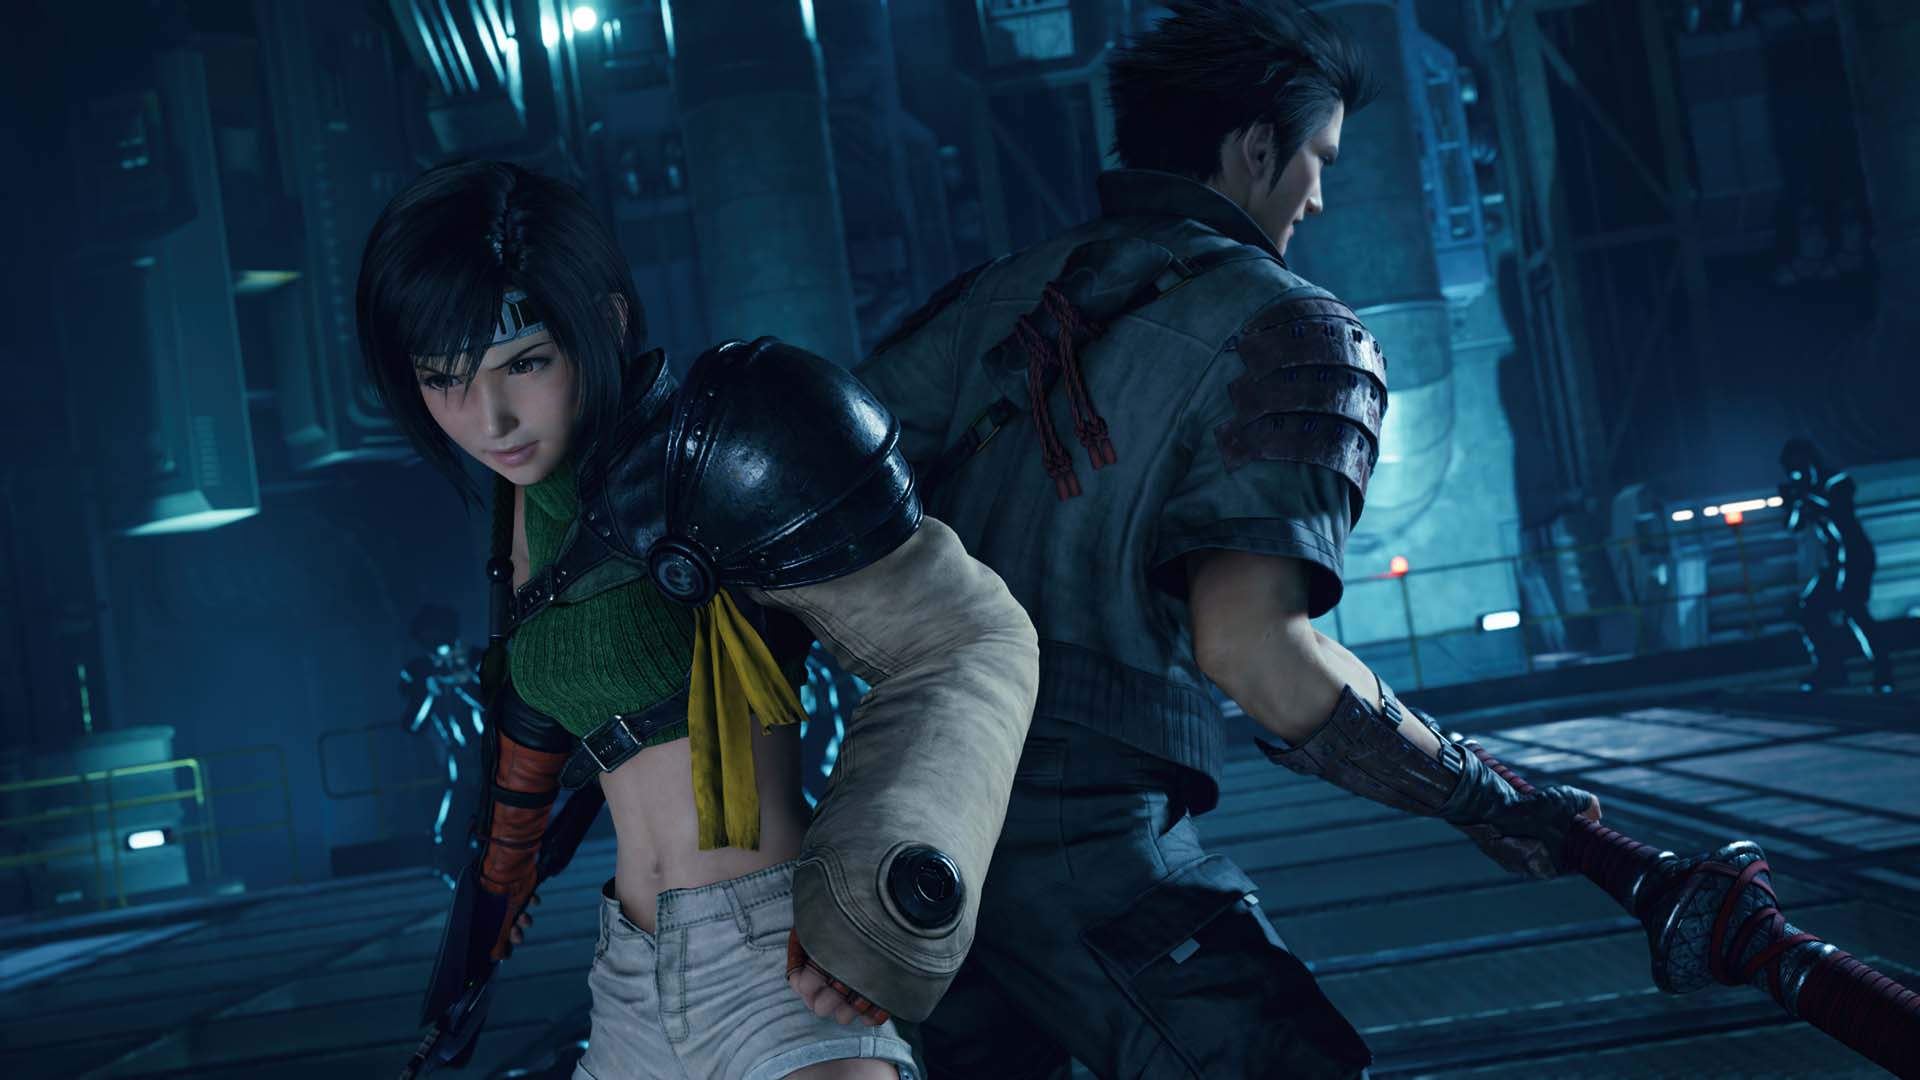 Final Fantasy VII Remake - EPISODE INTERmission (New Story Content Featuring Yuffie) DLC EU PS5 CD Key [USD 11.29]